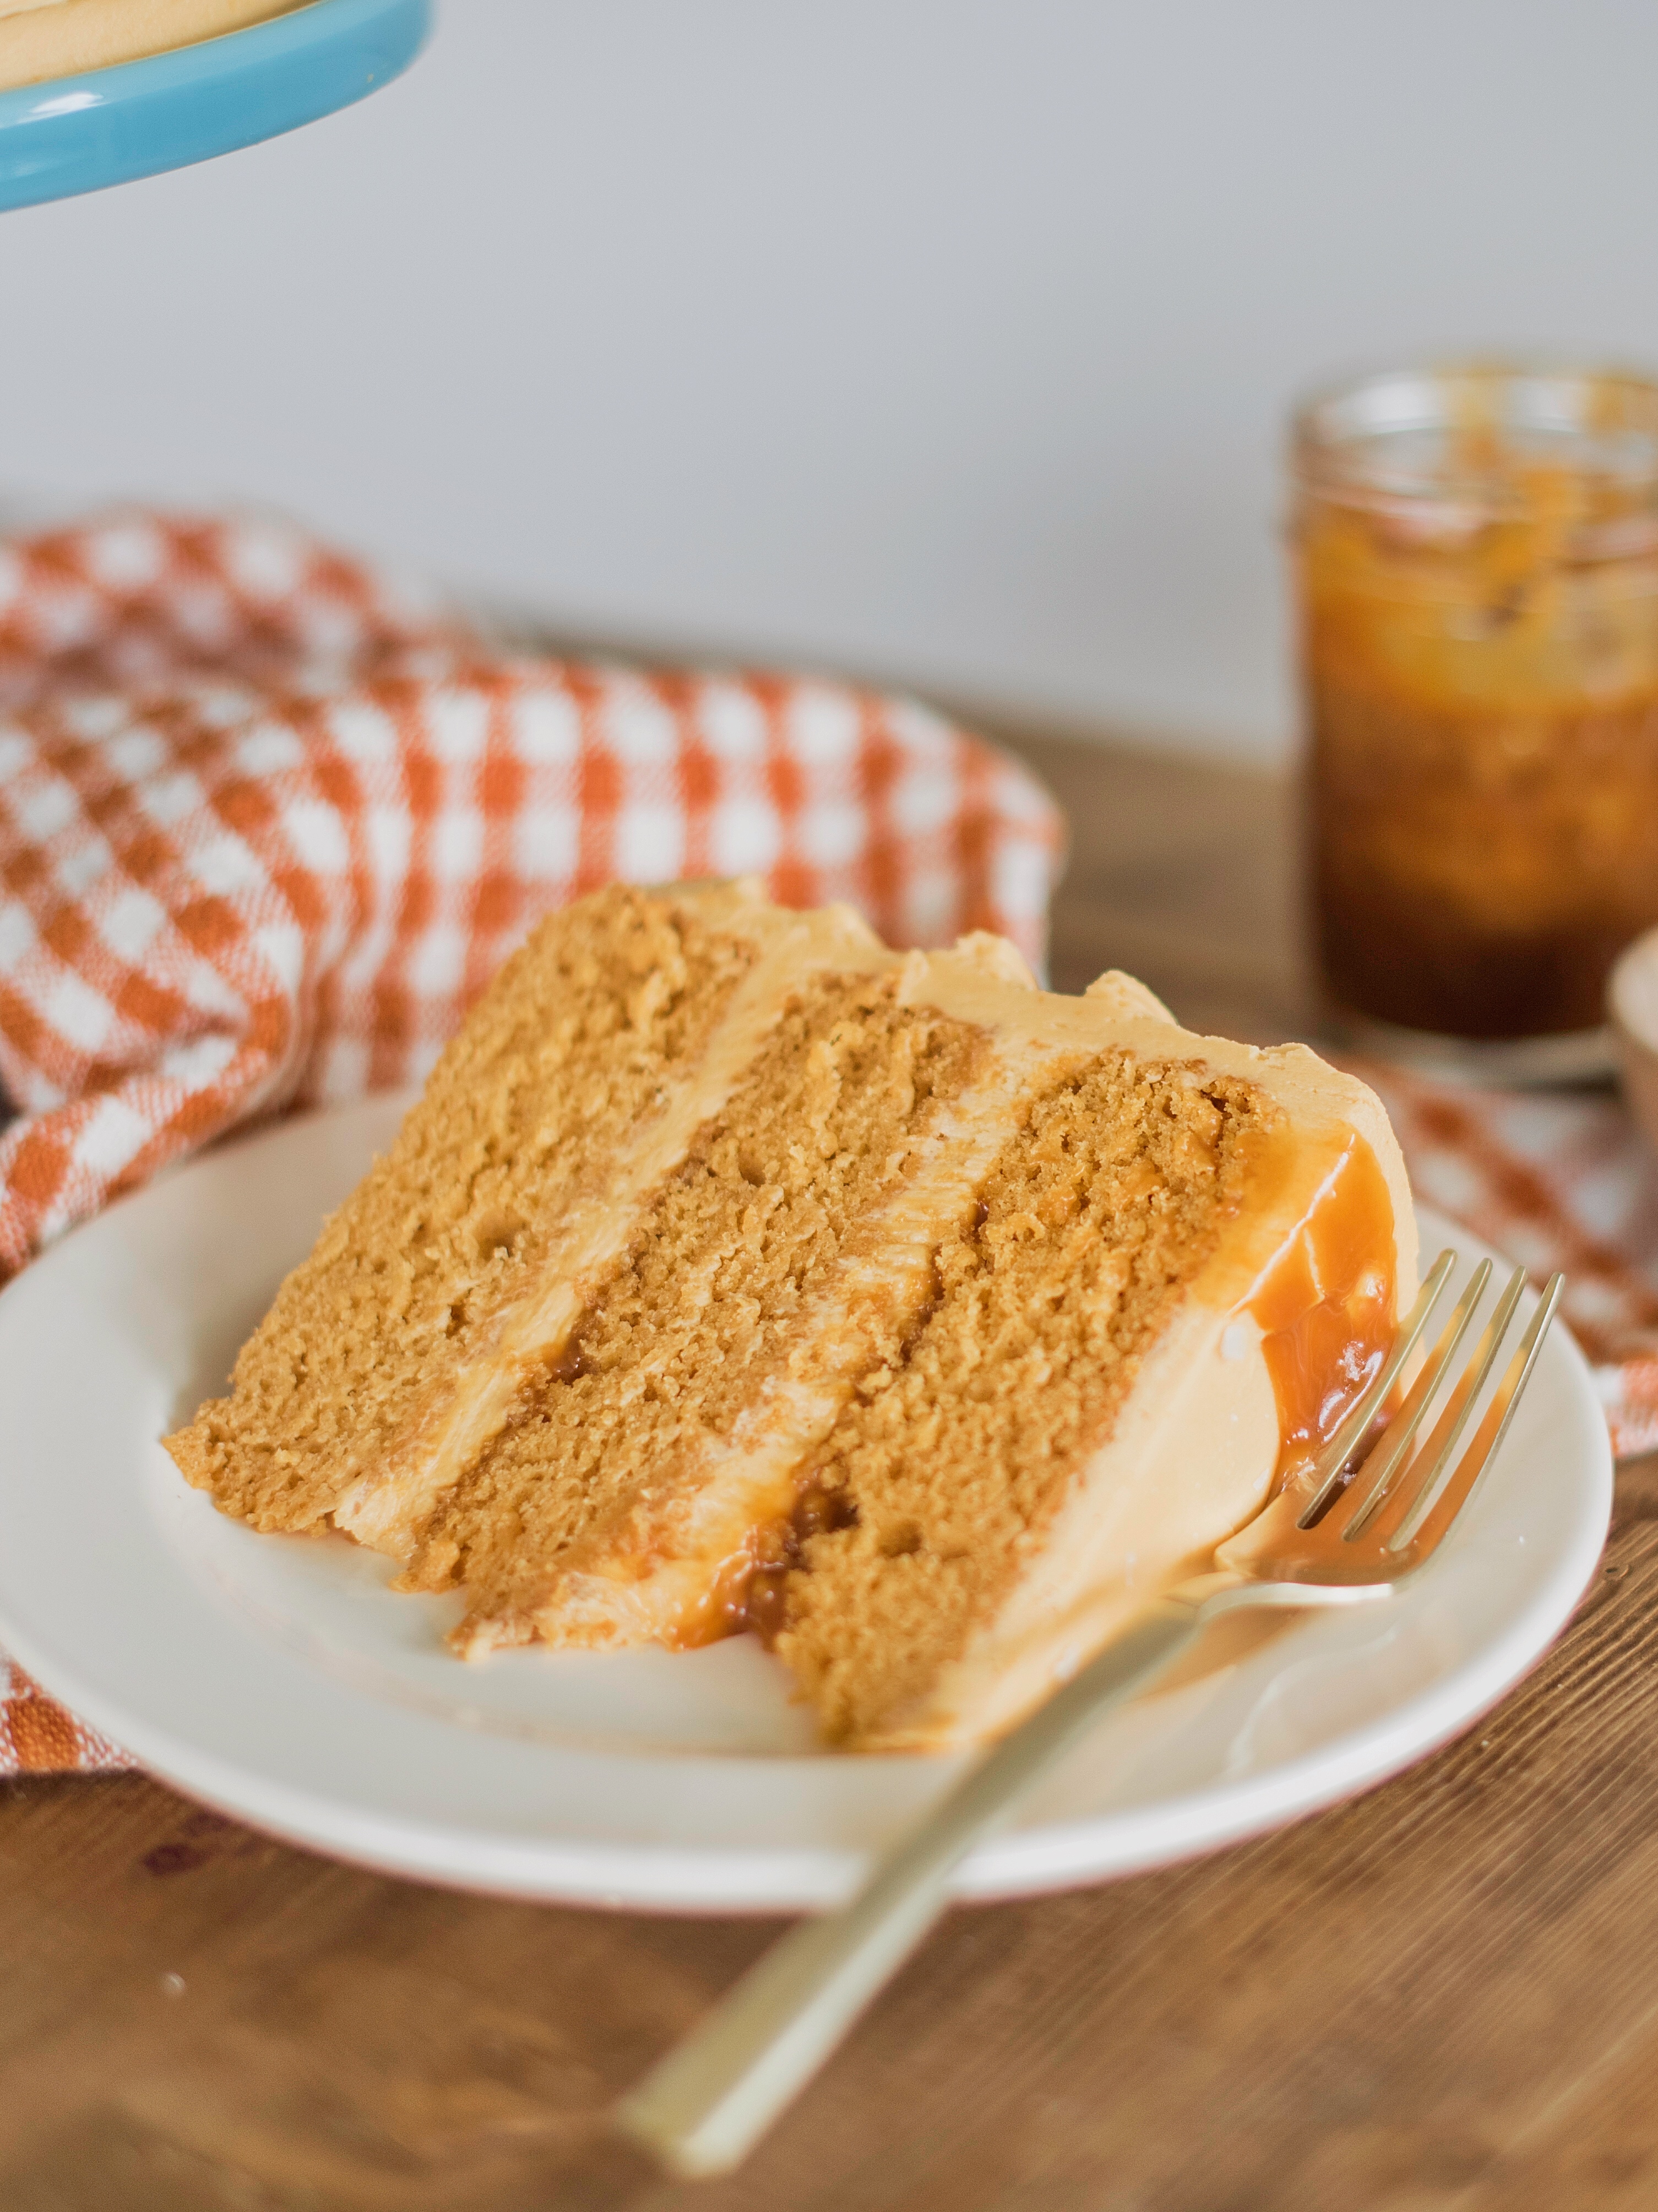 Caramel layered cake on a plate with a fork.